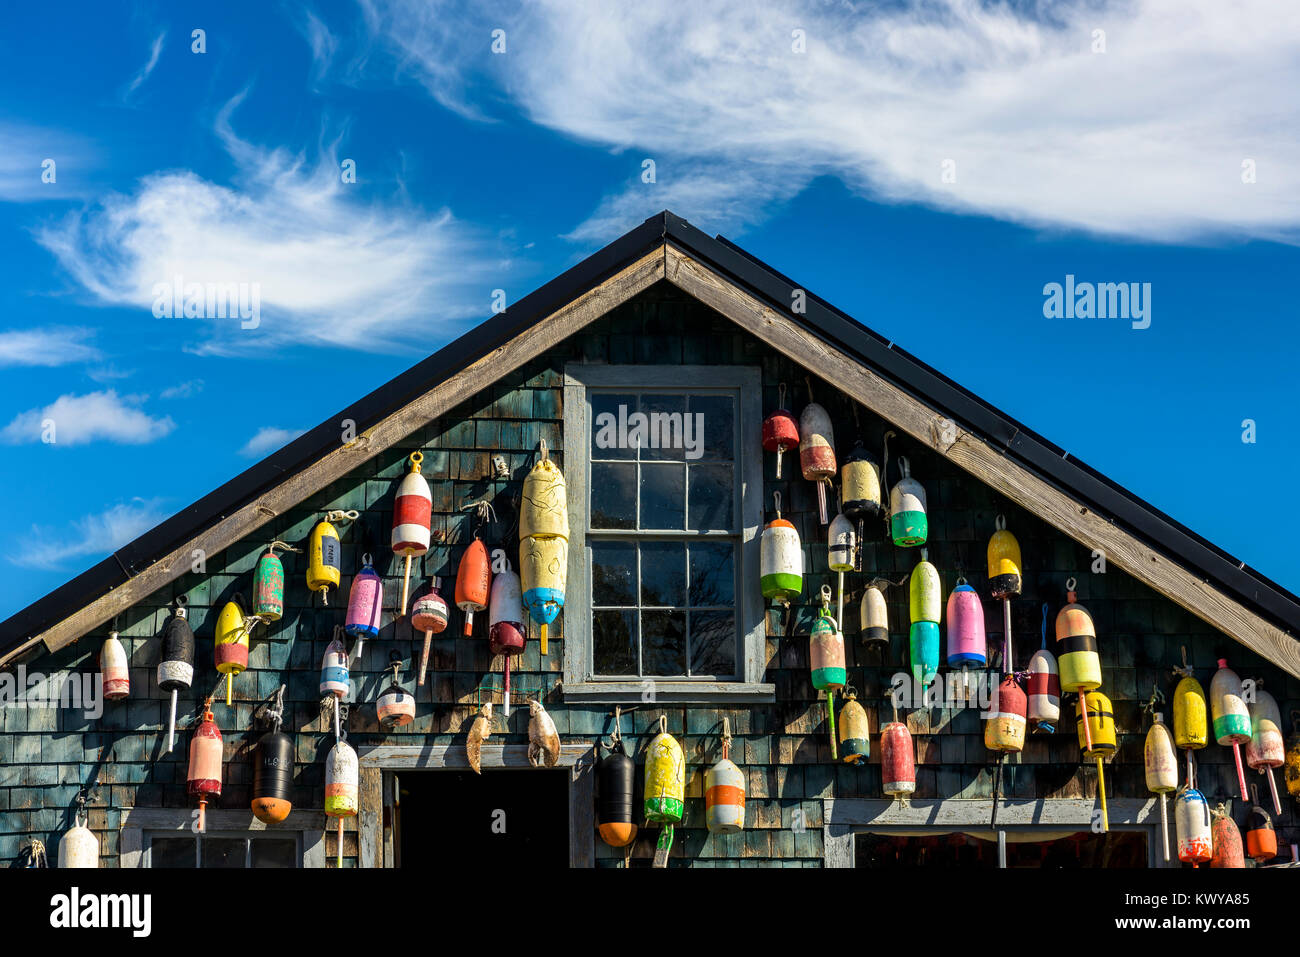 Lobster bouys adorn the side of a traditional cedar shaked building along the coast of Maine. Stock Photo